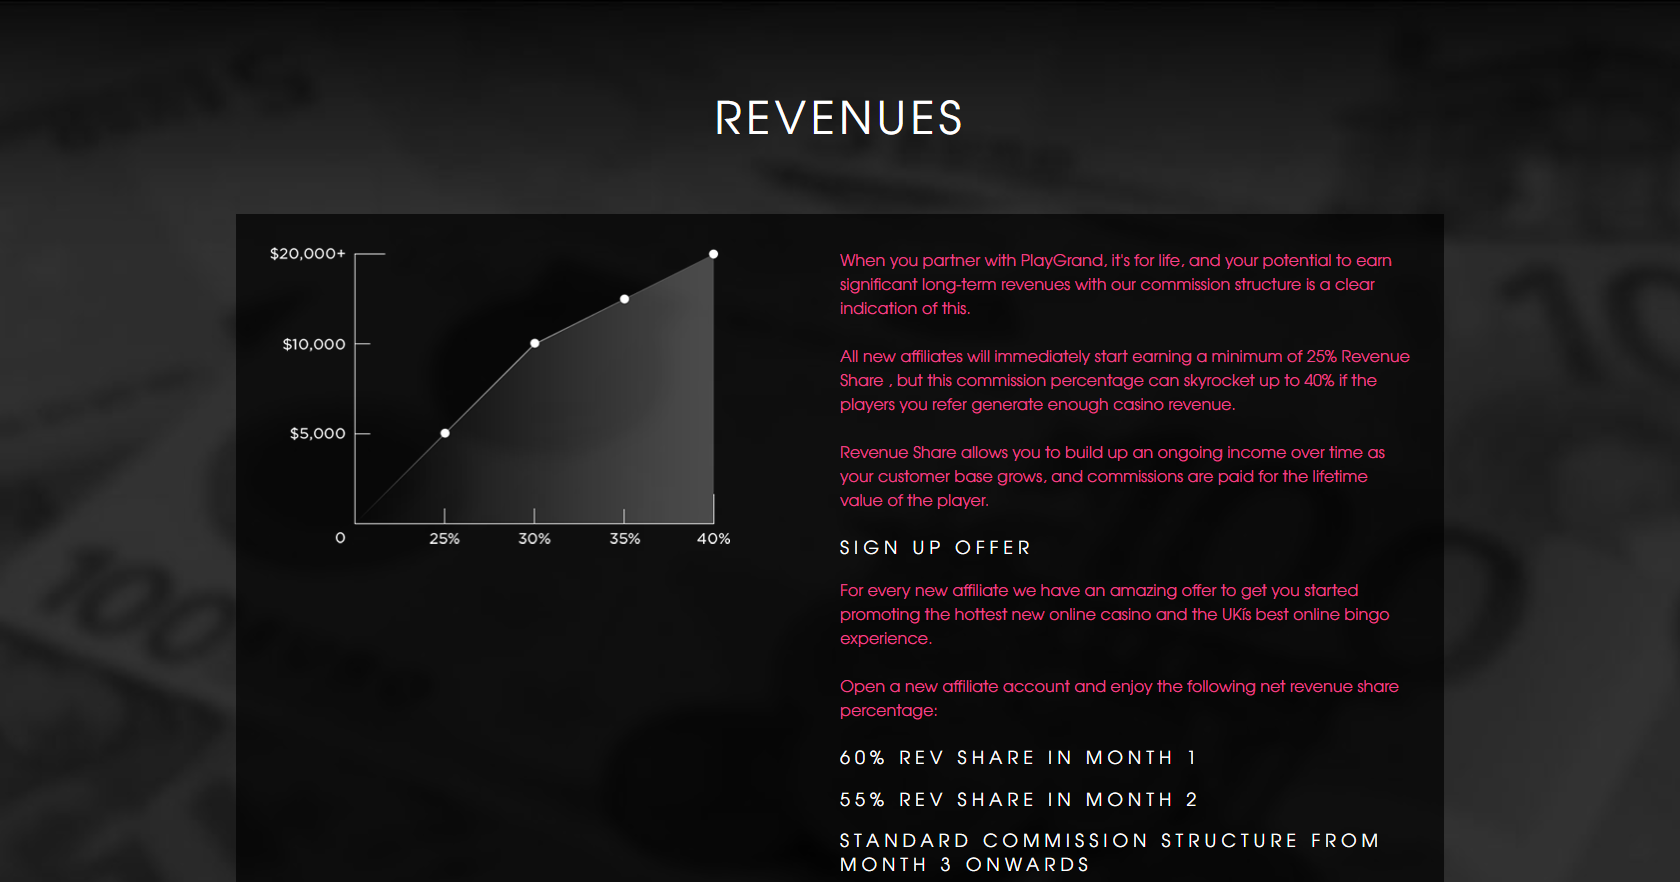 Playgrandaffiliates Affiliate Program Review: Earn Up To 60% Revenue Share 1st Month.